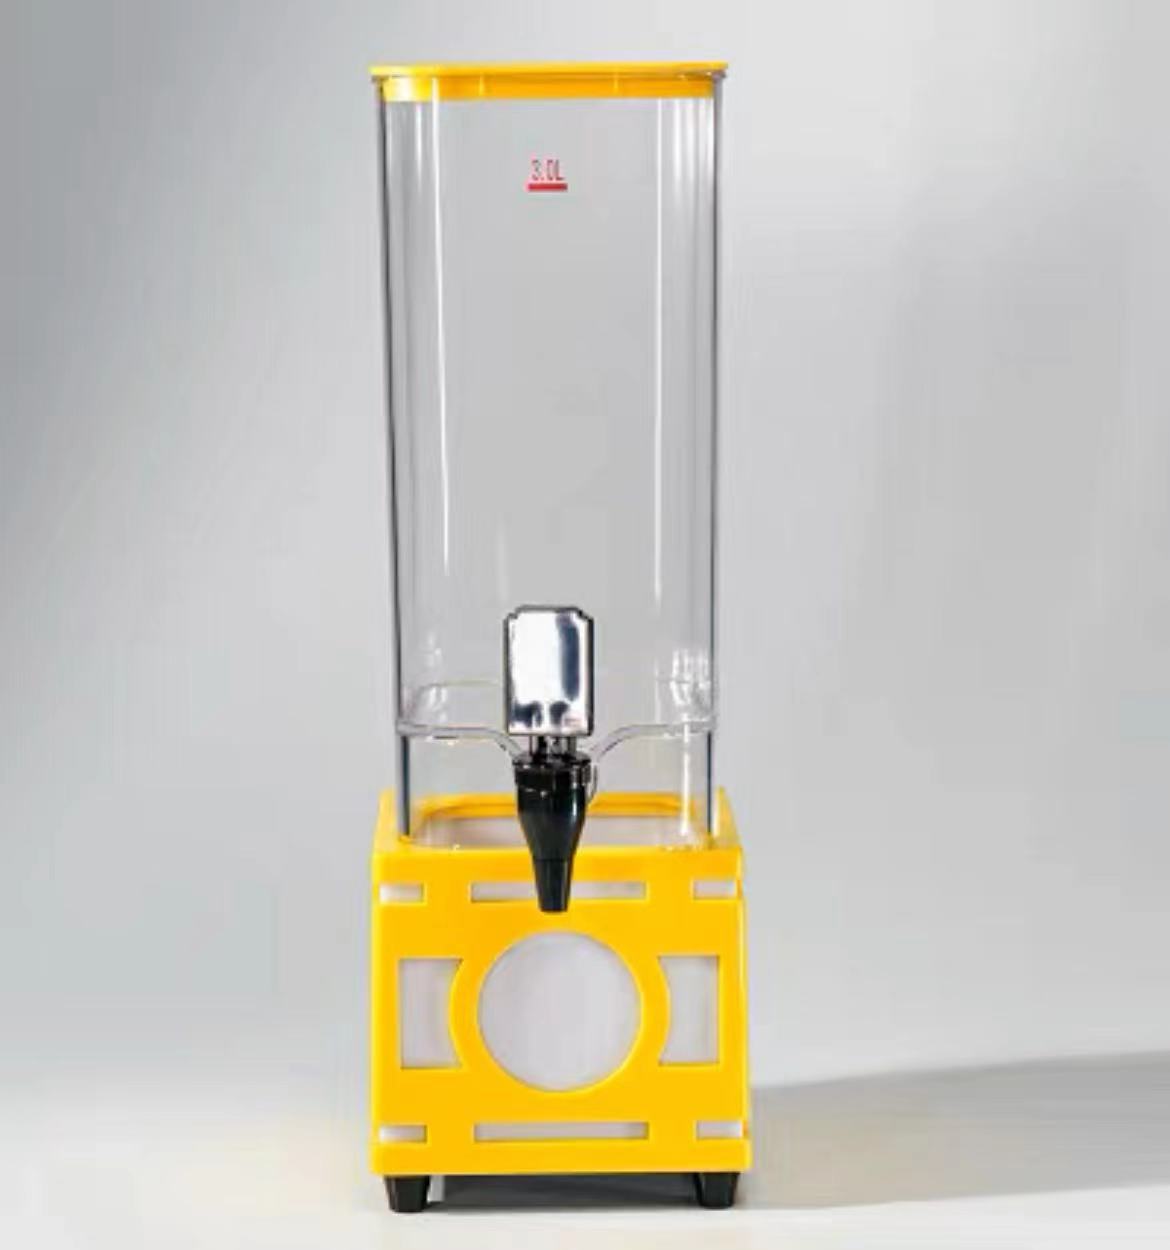 Beer Dispenser with LED Light 3 L, Margarita Mimosa Tower Drink Dispenser  with Tap, Keep Beverages Cold, Perfect for Party Bar Gameday - YELLOW